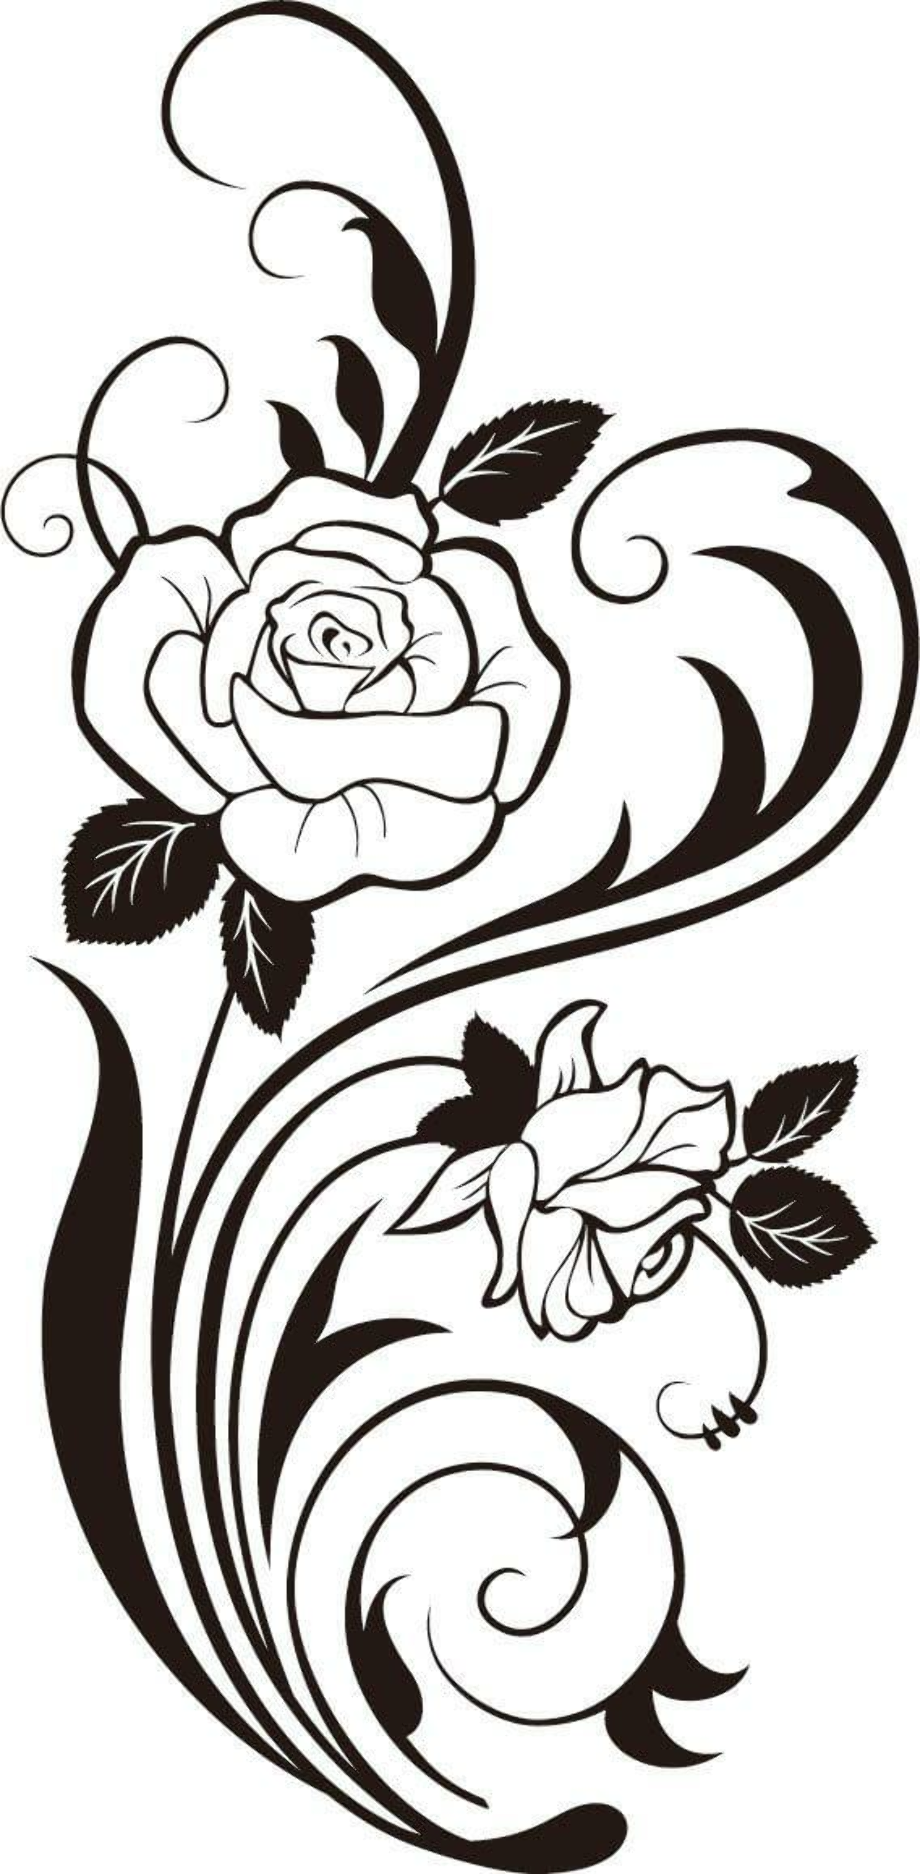 Rose clipart black and white silhouette.